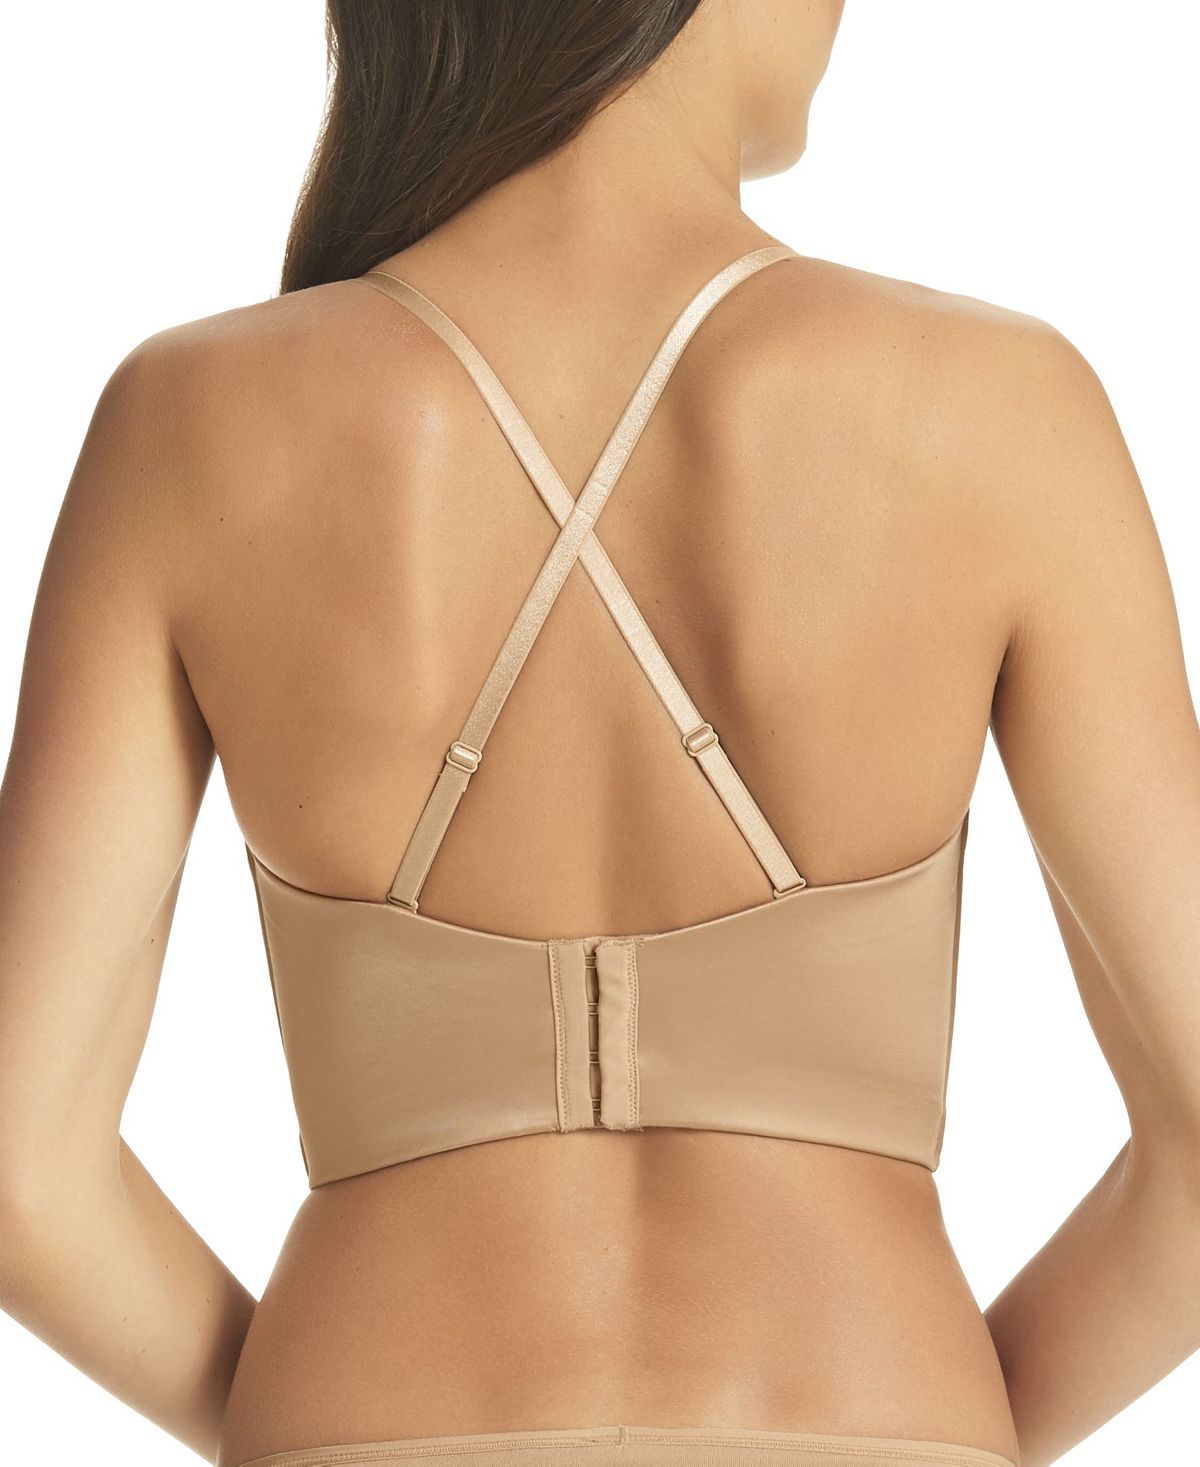 Fine Lines Australia Rl029a Refined 4 Way Strapless Convertible Bustier Nude